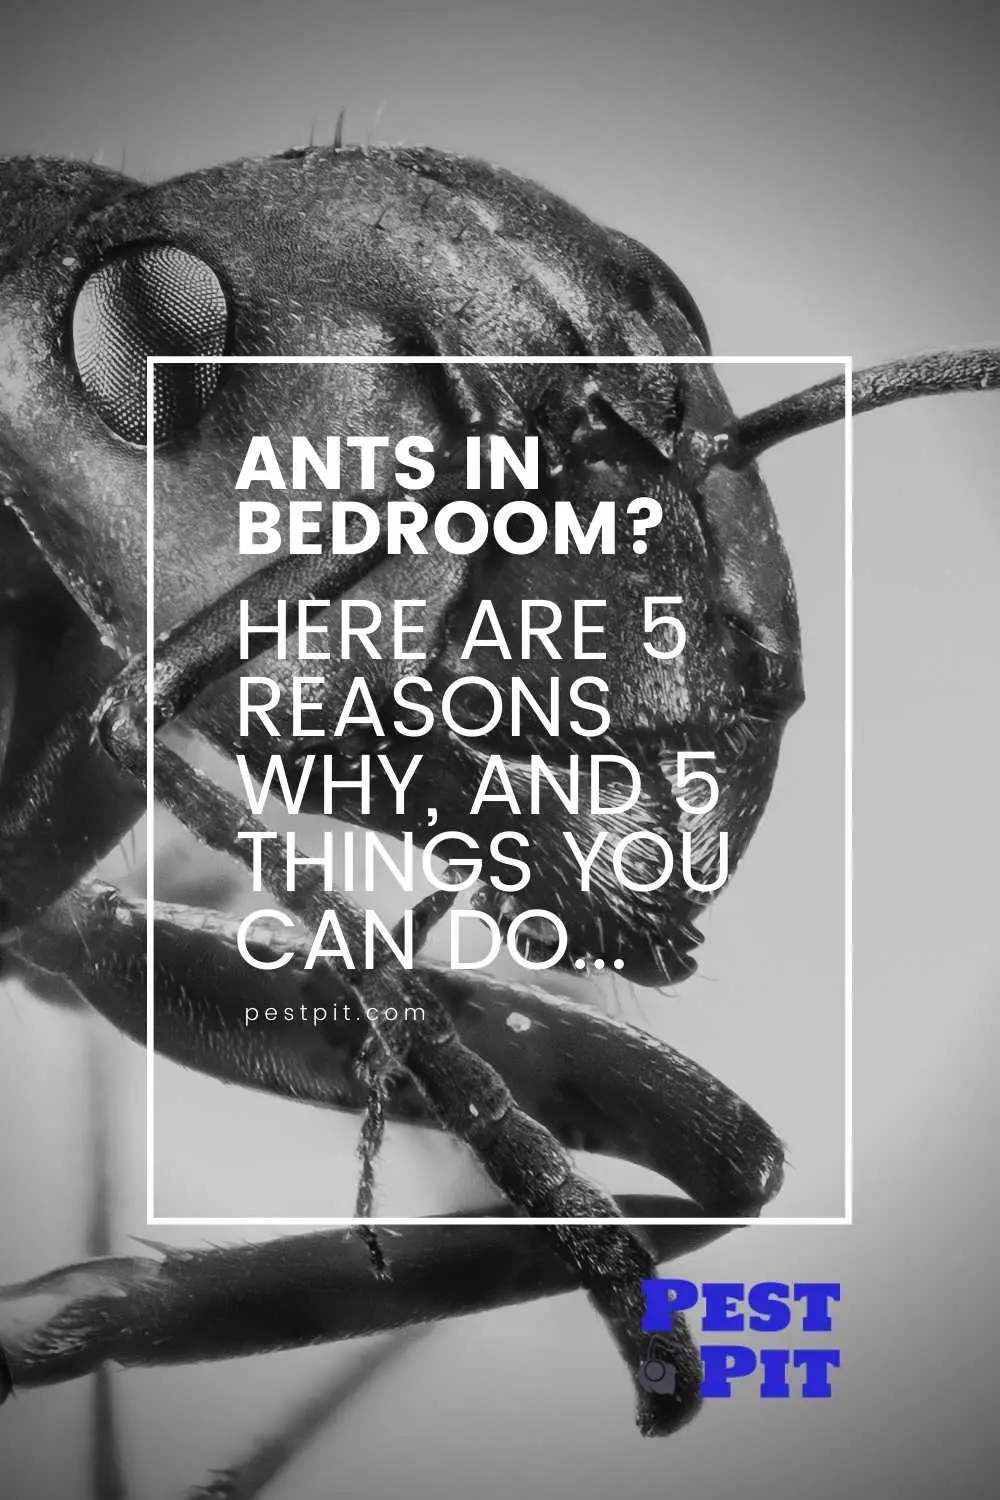 Ants In Bedroom - 5 reasons why and 5 things you can do